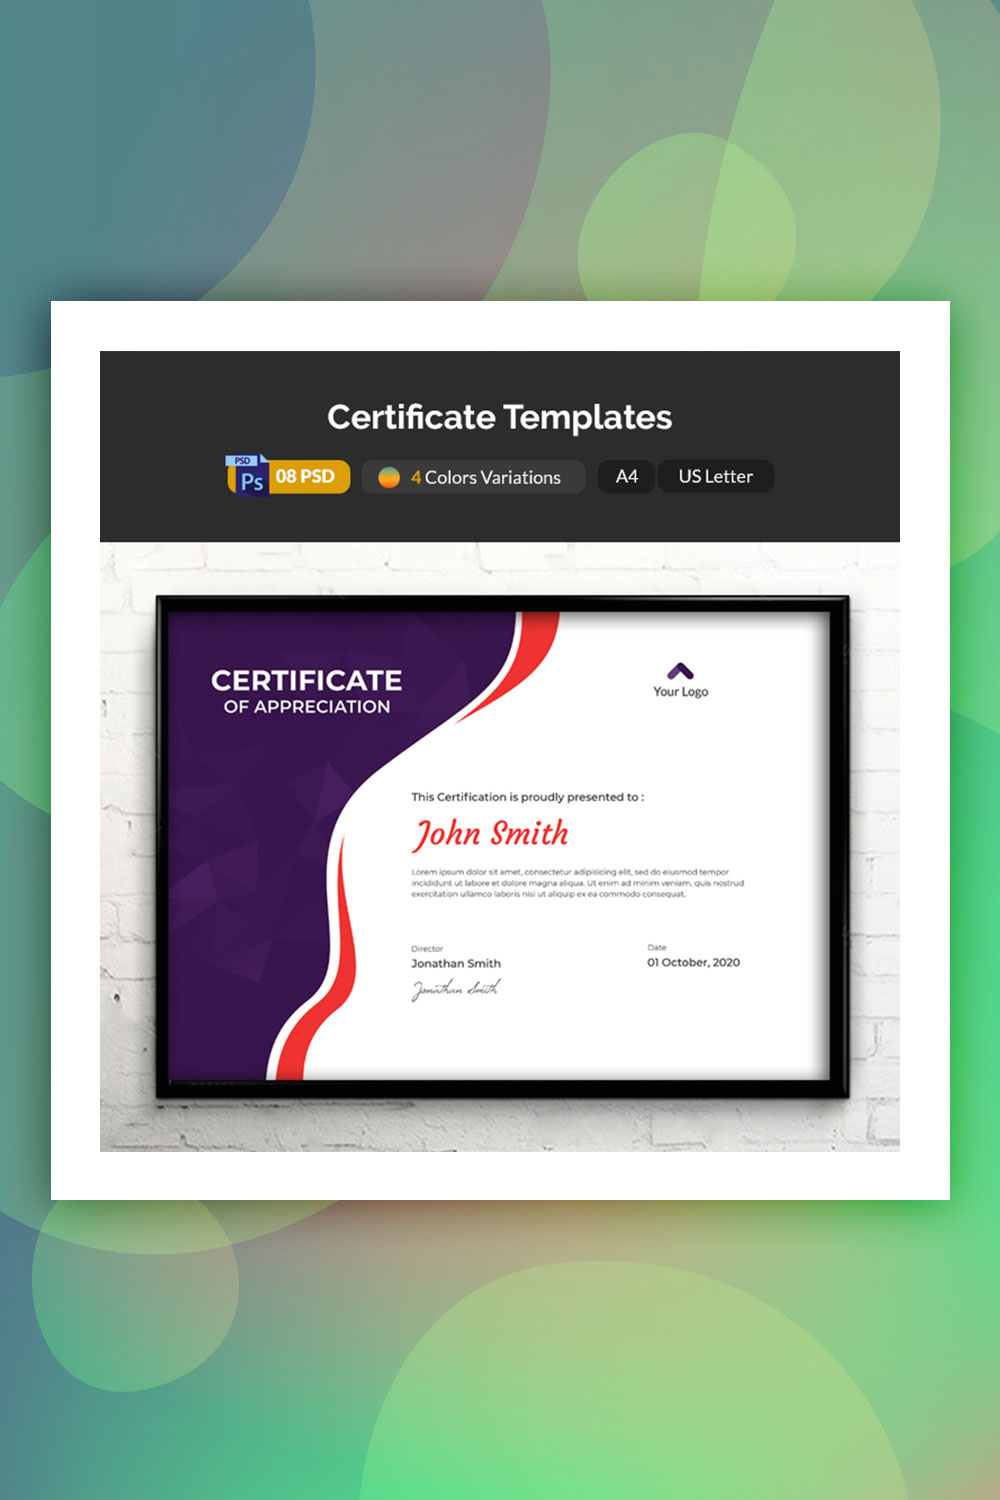 19 Attention Grabbing Certificate Templates – Colorlib Pertaining To No Certificate Templates Could Be Found